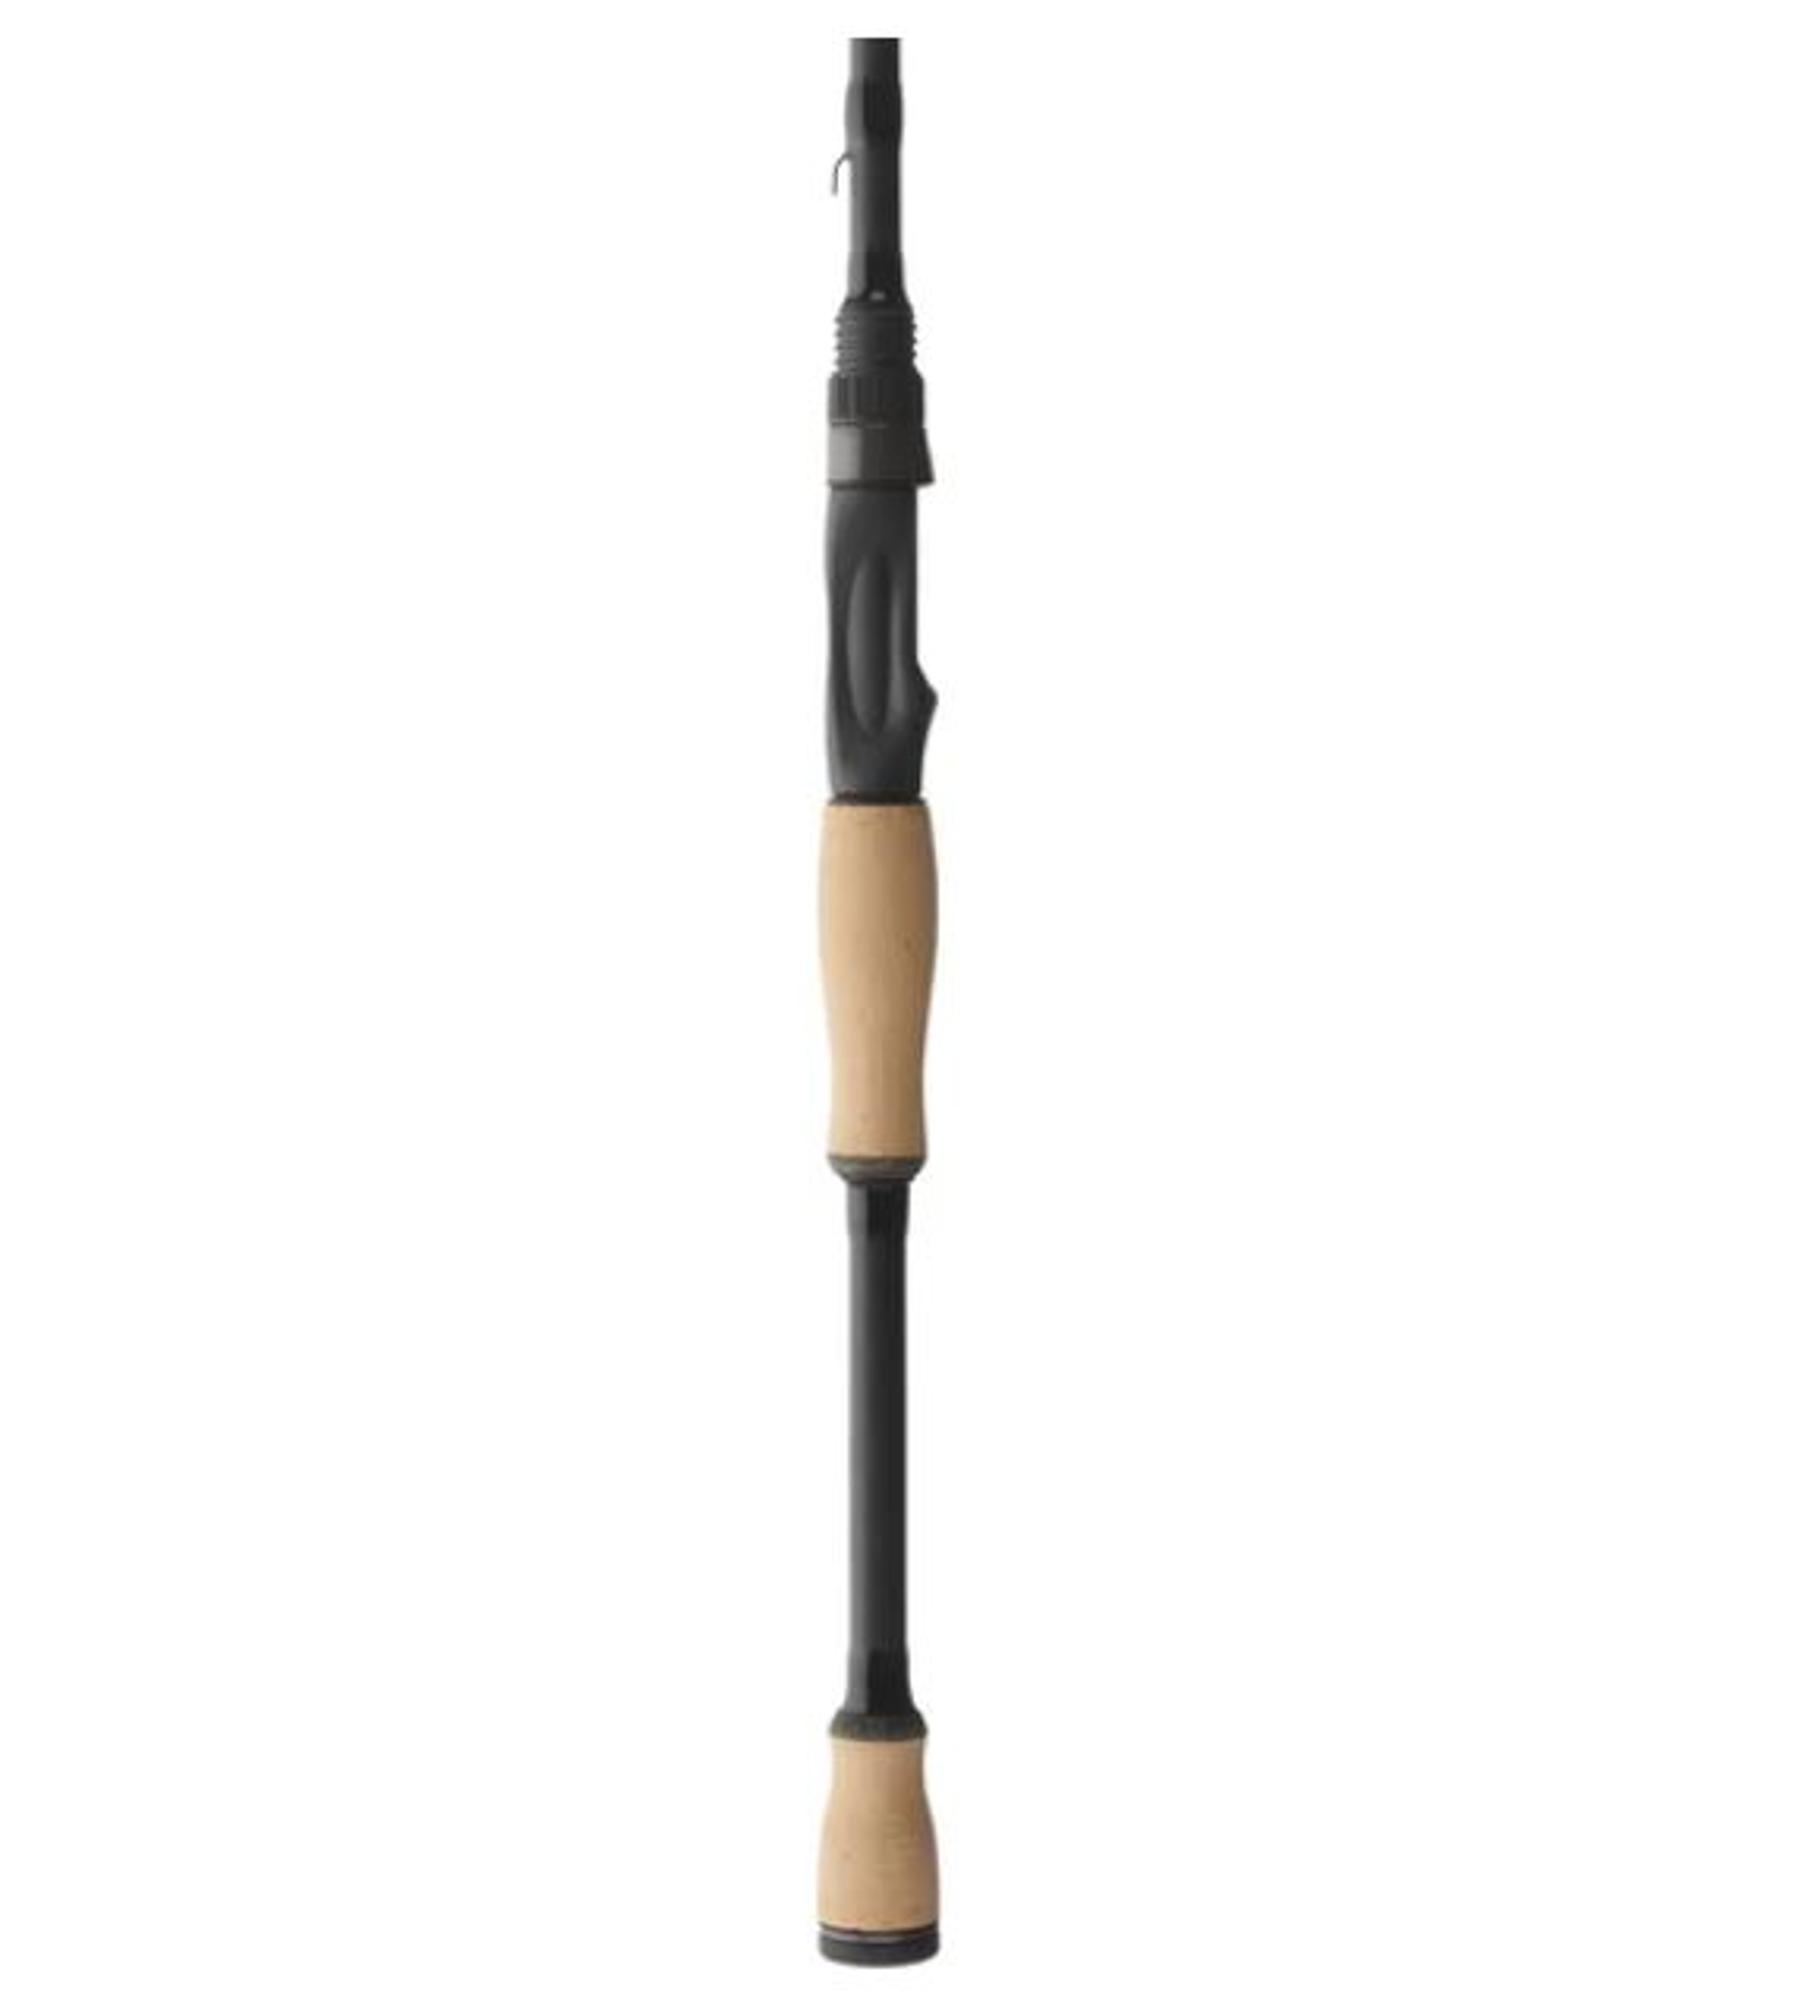 Naked 6ft 10in Medium Moderate Fast | 850033706000 | POWELL RODS | Fishing | Rods | Casting